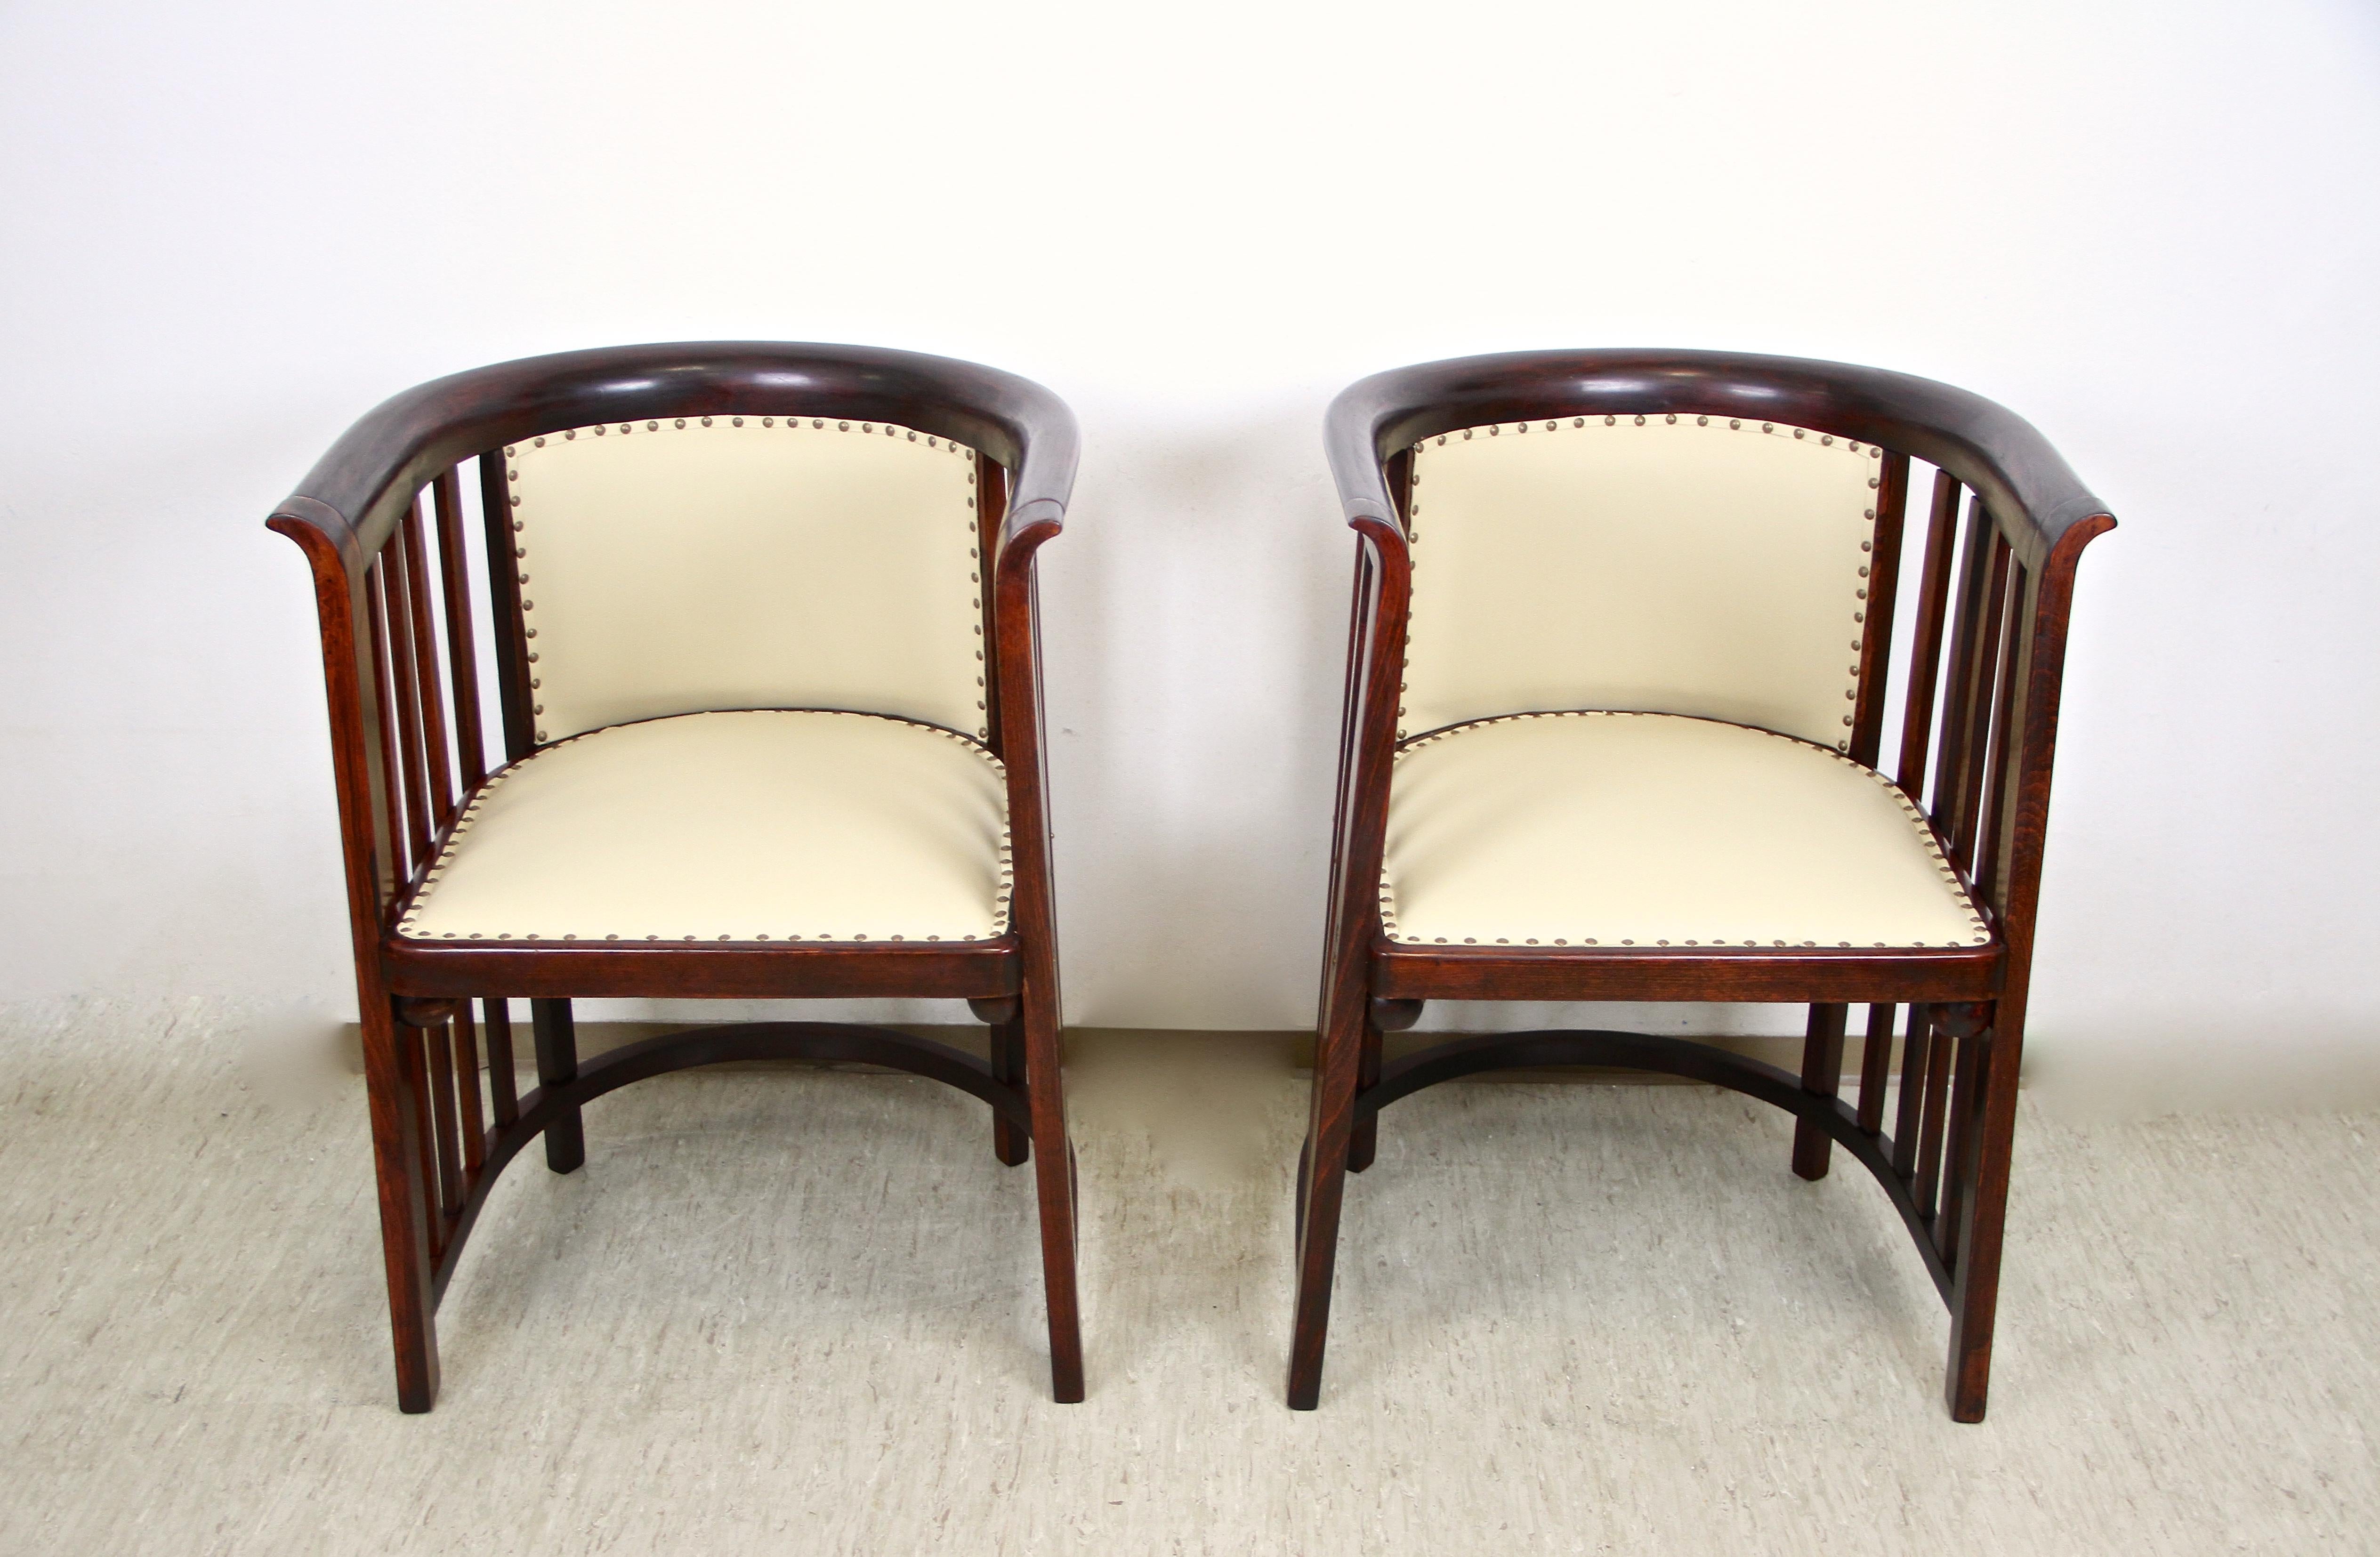 Art Nouveau Pair of Bentwood Armchairs by J. Hoffmann and Thonet Table, Austria, circa 1905